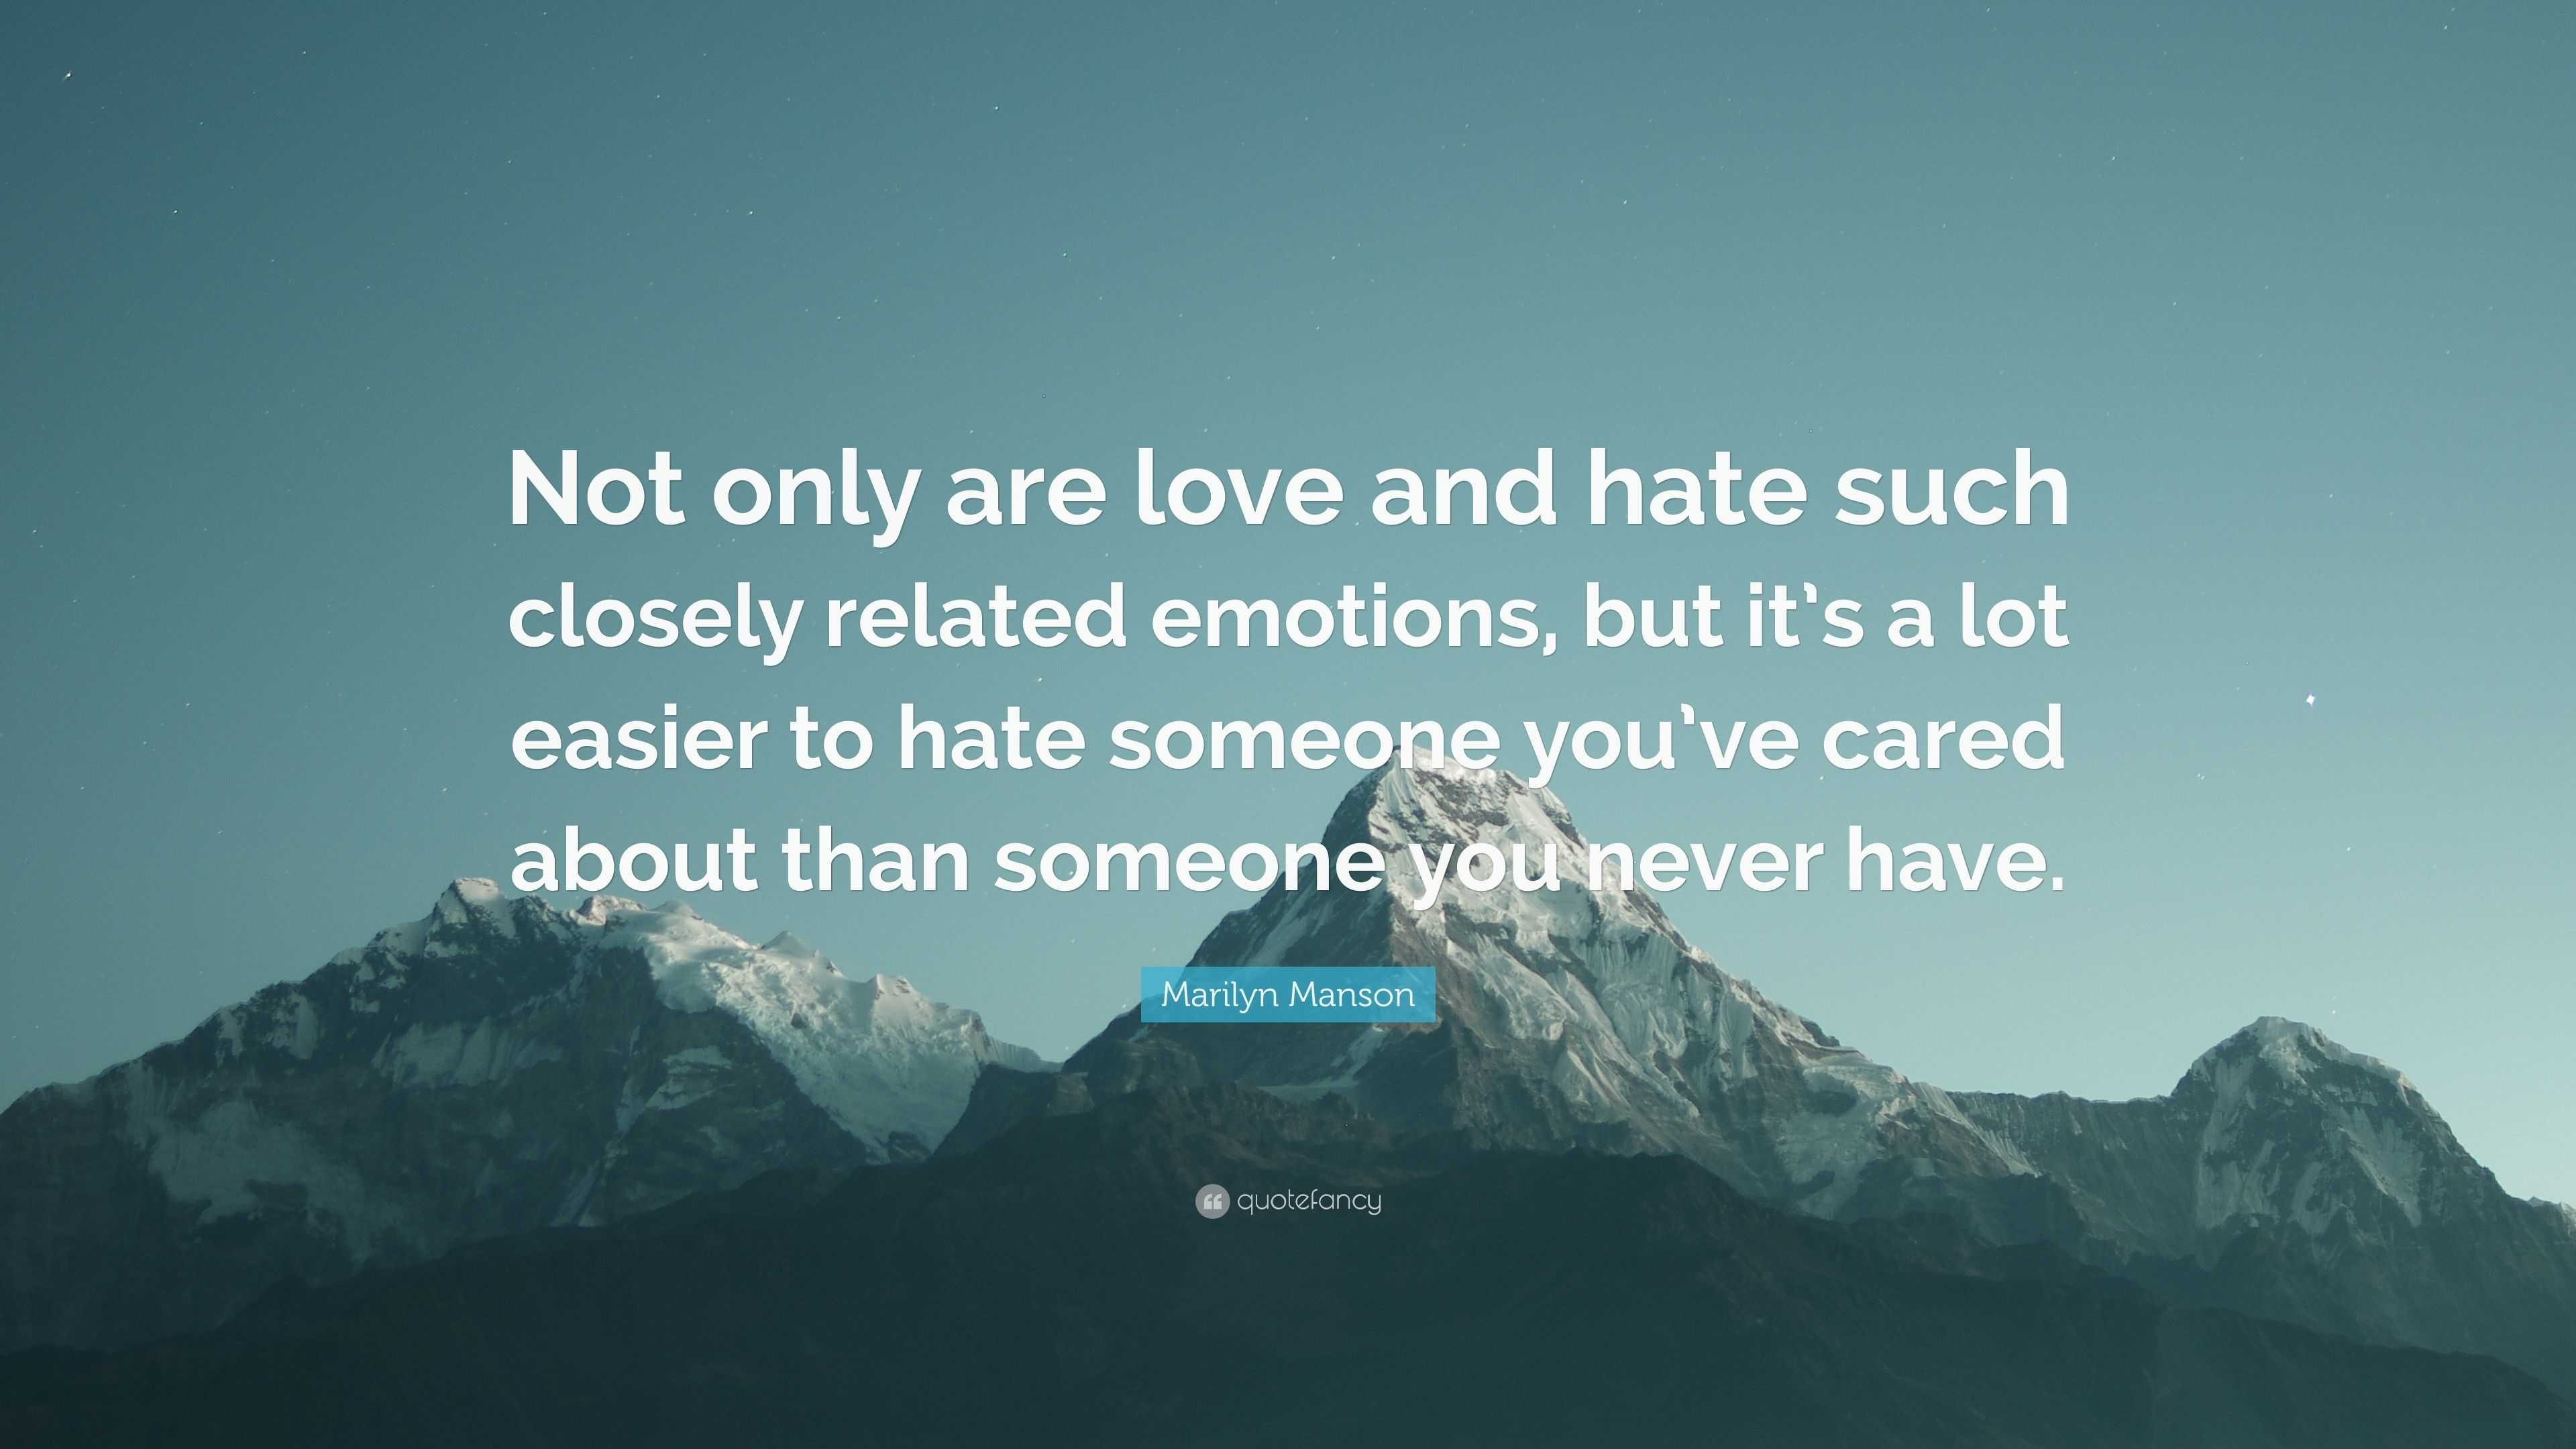 Marilyn Manson Quote “Not only are love and hate such closely emotions